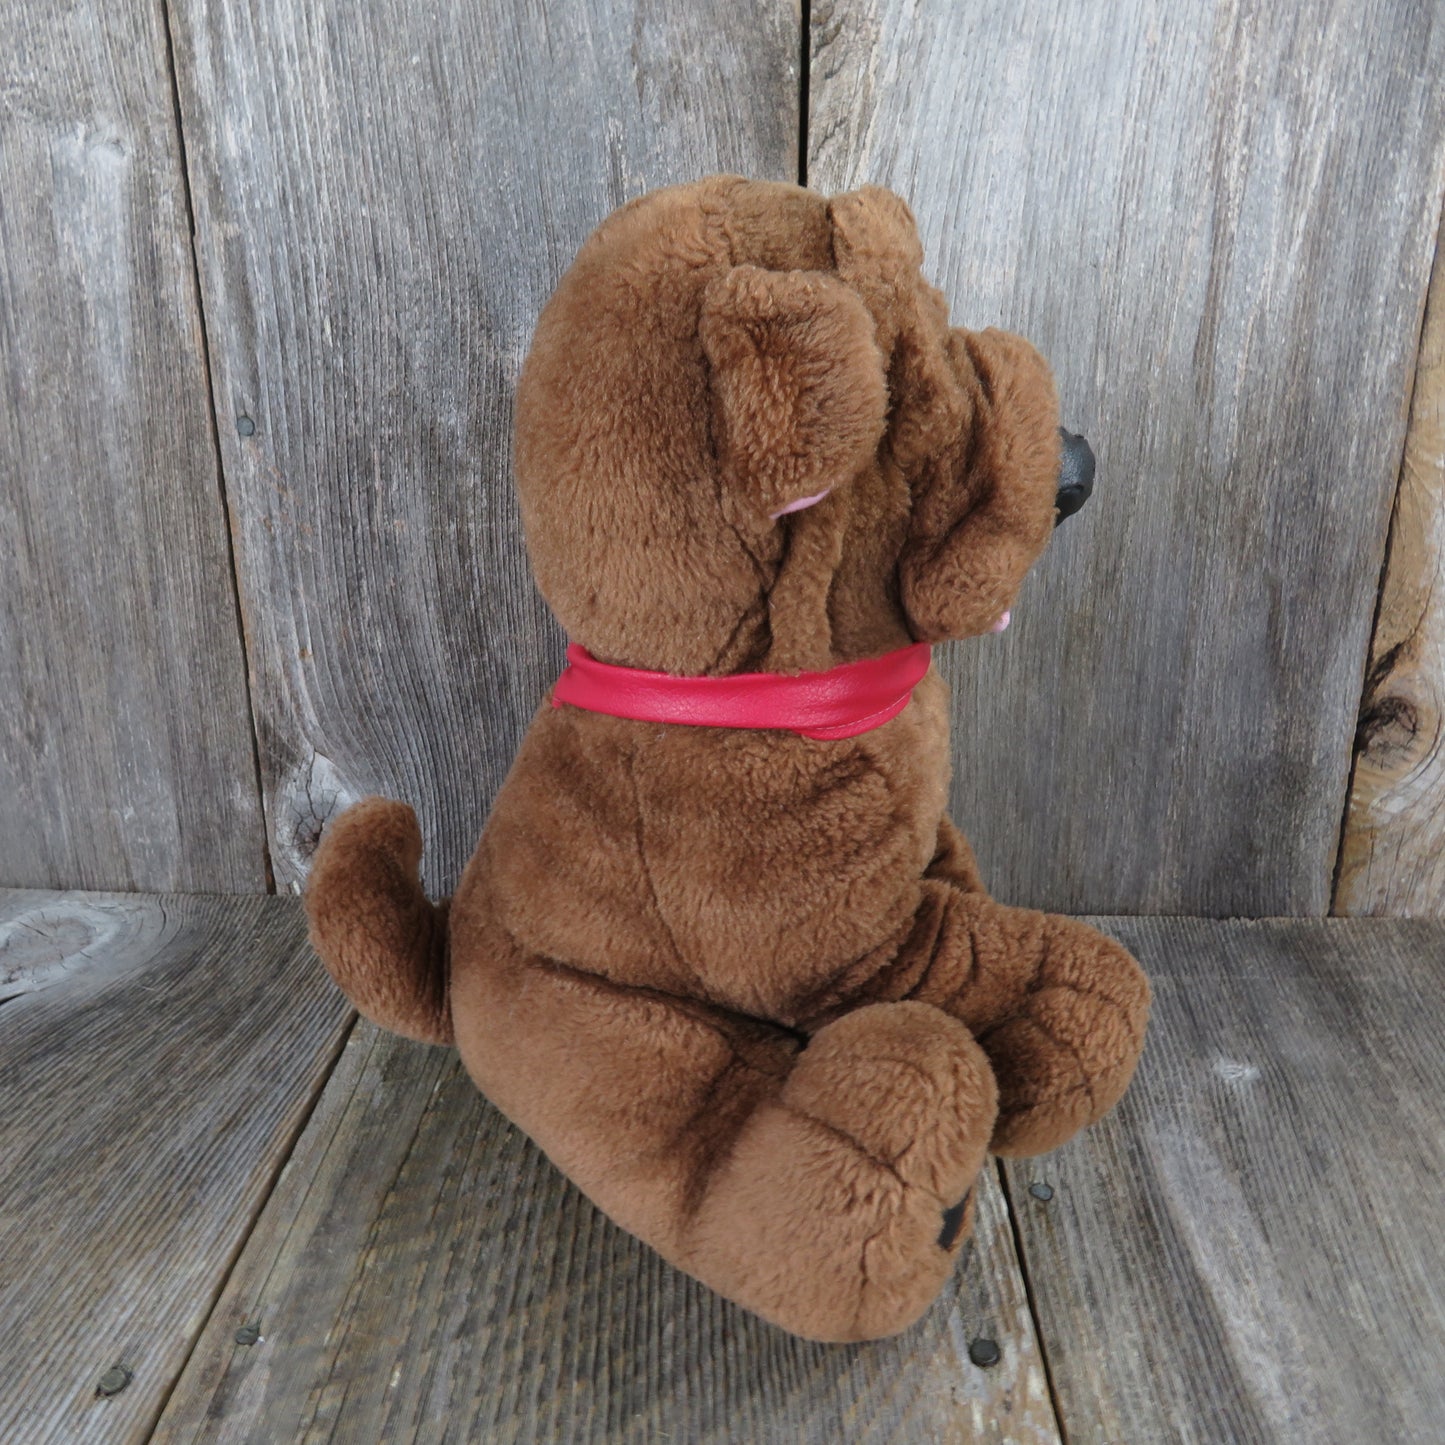 Vintage Dog Shar Pei Puppy Plush Brown Stuffed Animal Wrinkles Play by Play Tongue Red Collar - At Grandma's Table